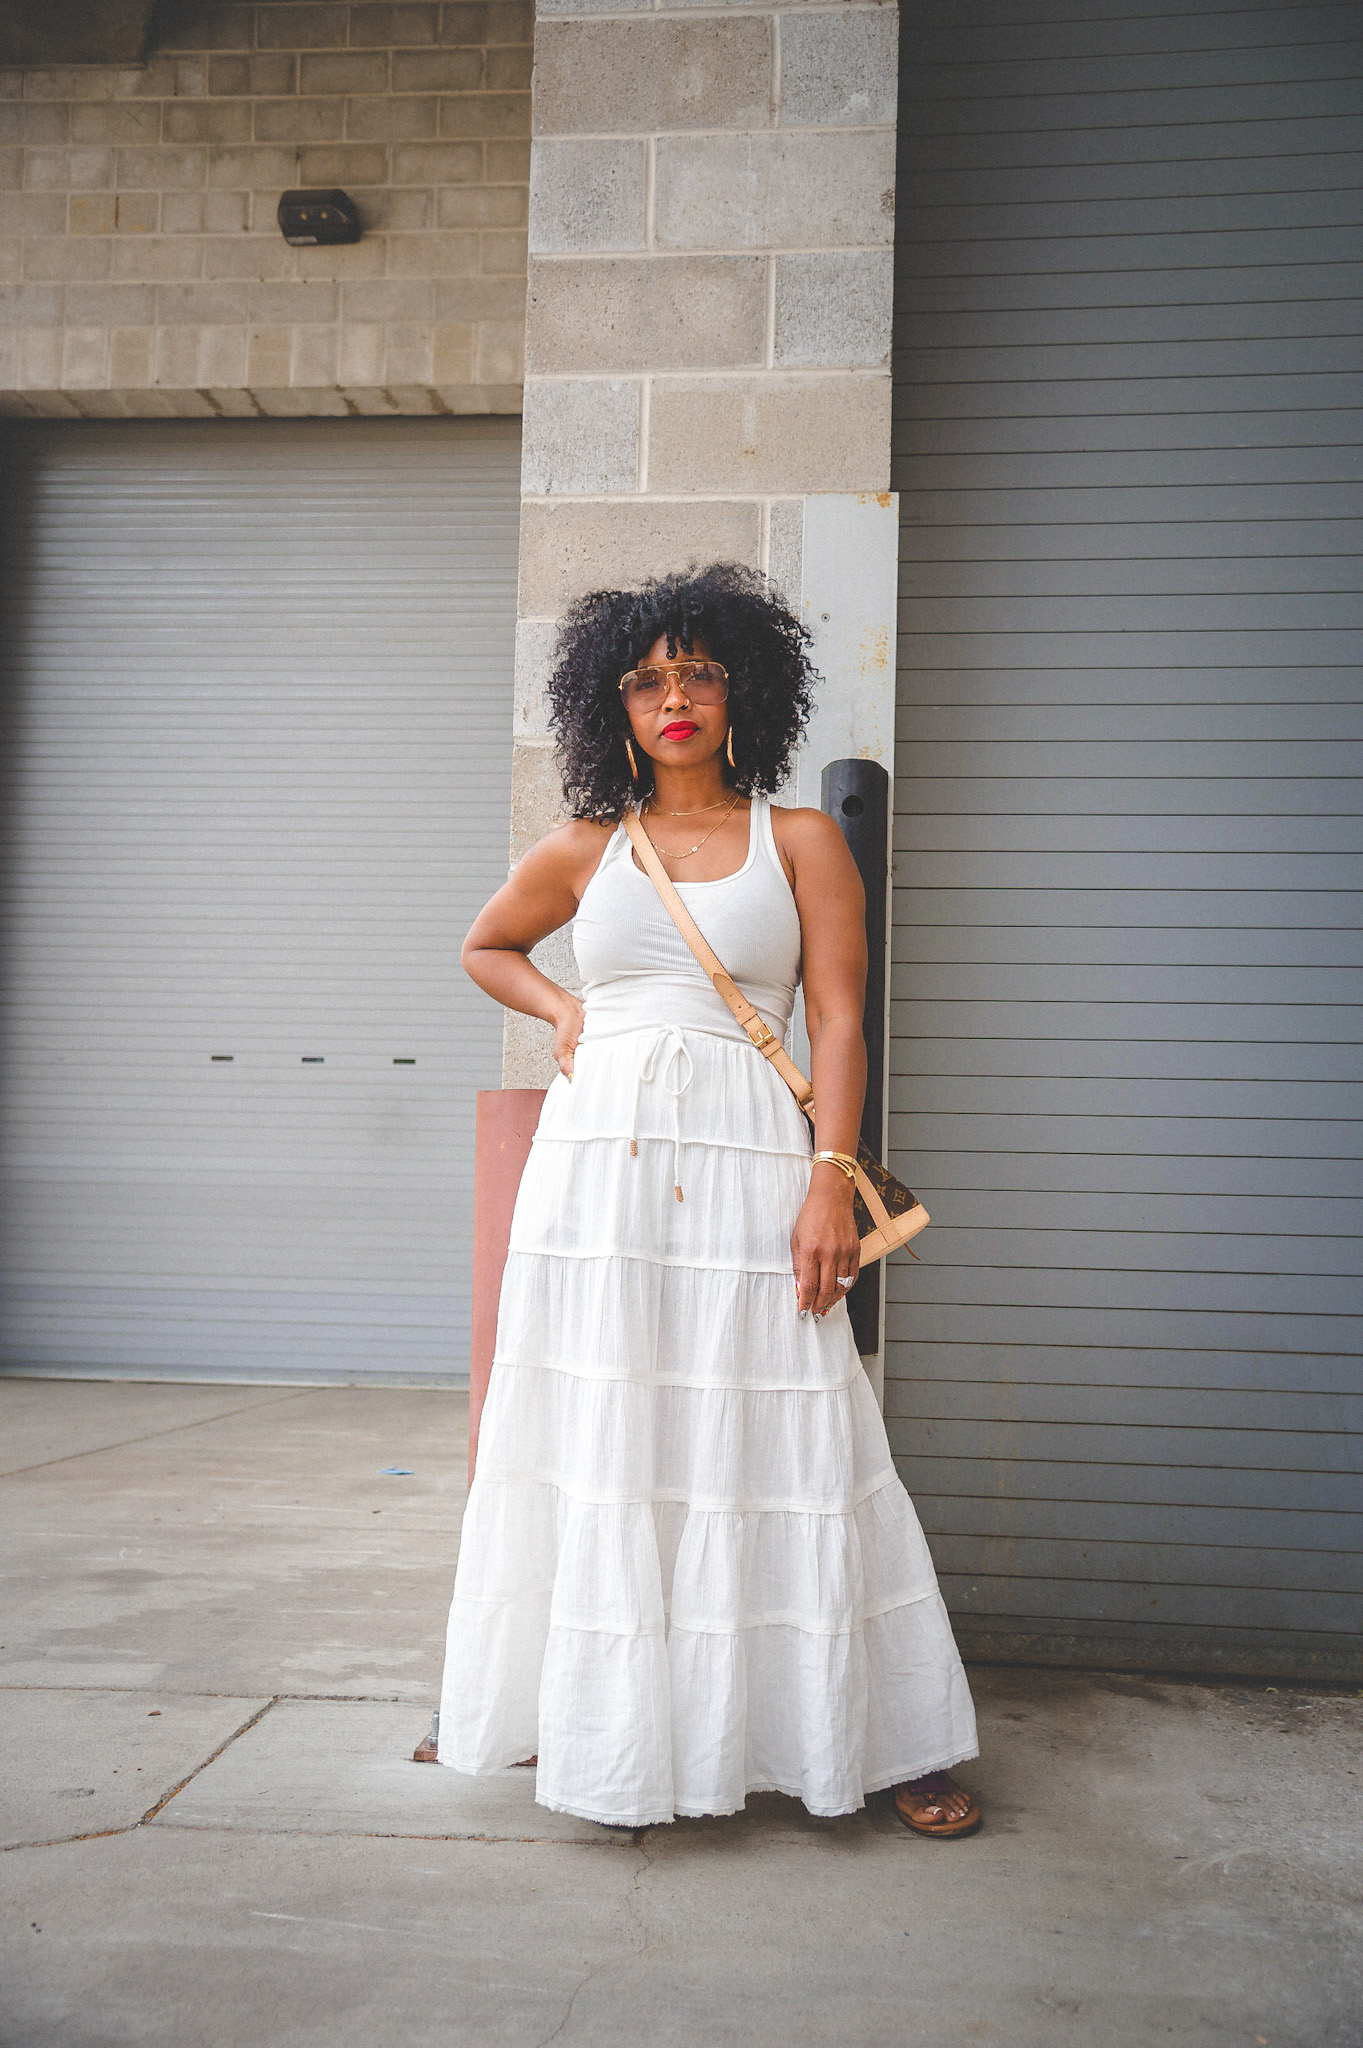 SWEENEE STYLE, FREE PEOPLE STYLE,  SUMMER OUTFIT, HOW TO WEAR CREAM, CREAM SKIRT, MAXI SKIRT OUTFITS, NATURAL HAIRSTYLES, BLOGGER, INDIANAPOLIS BLOGGER, INDIANAPOLIS INFLUENCER, INDIANA FASHION CONTENT CREATOR